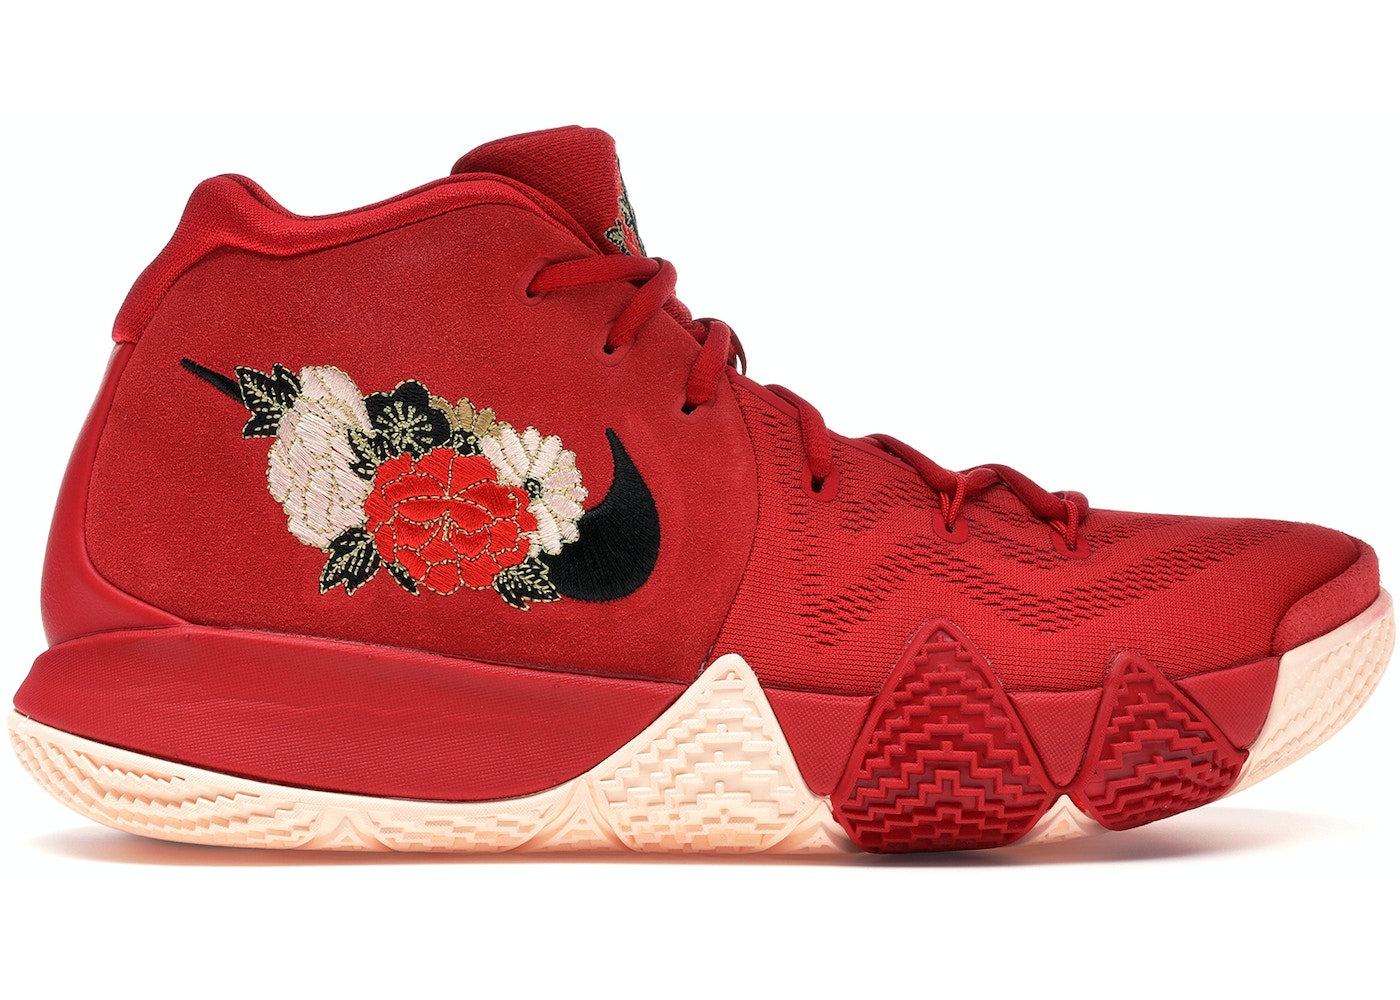 NIKE KYRIE 4 CHINESE NEW YEAR (2018)